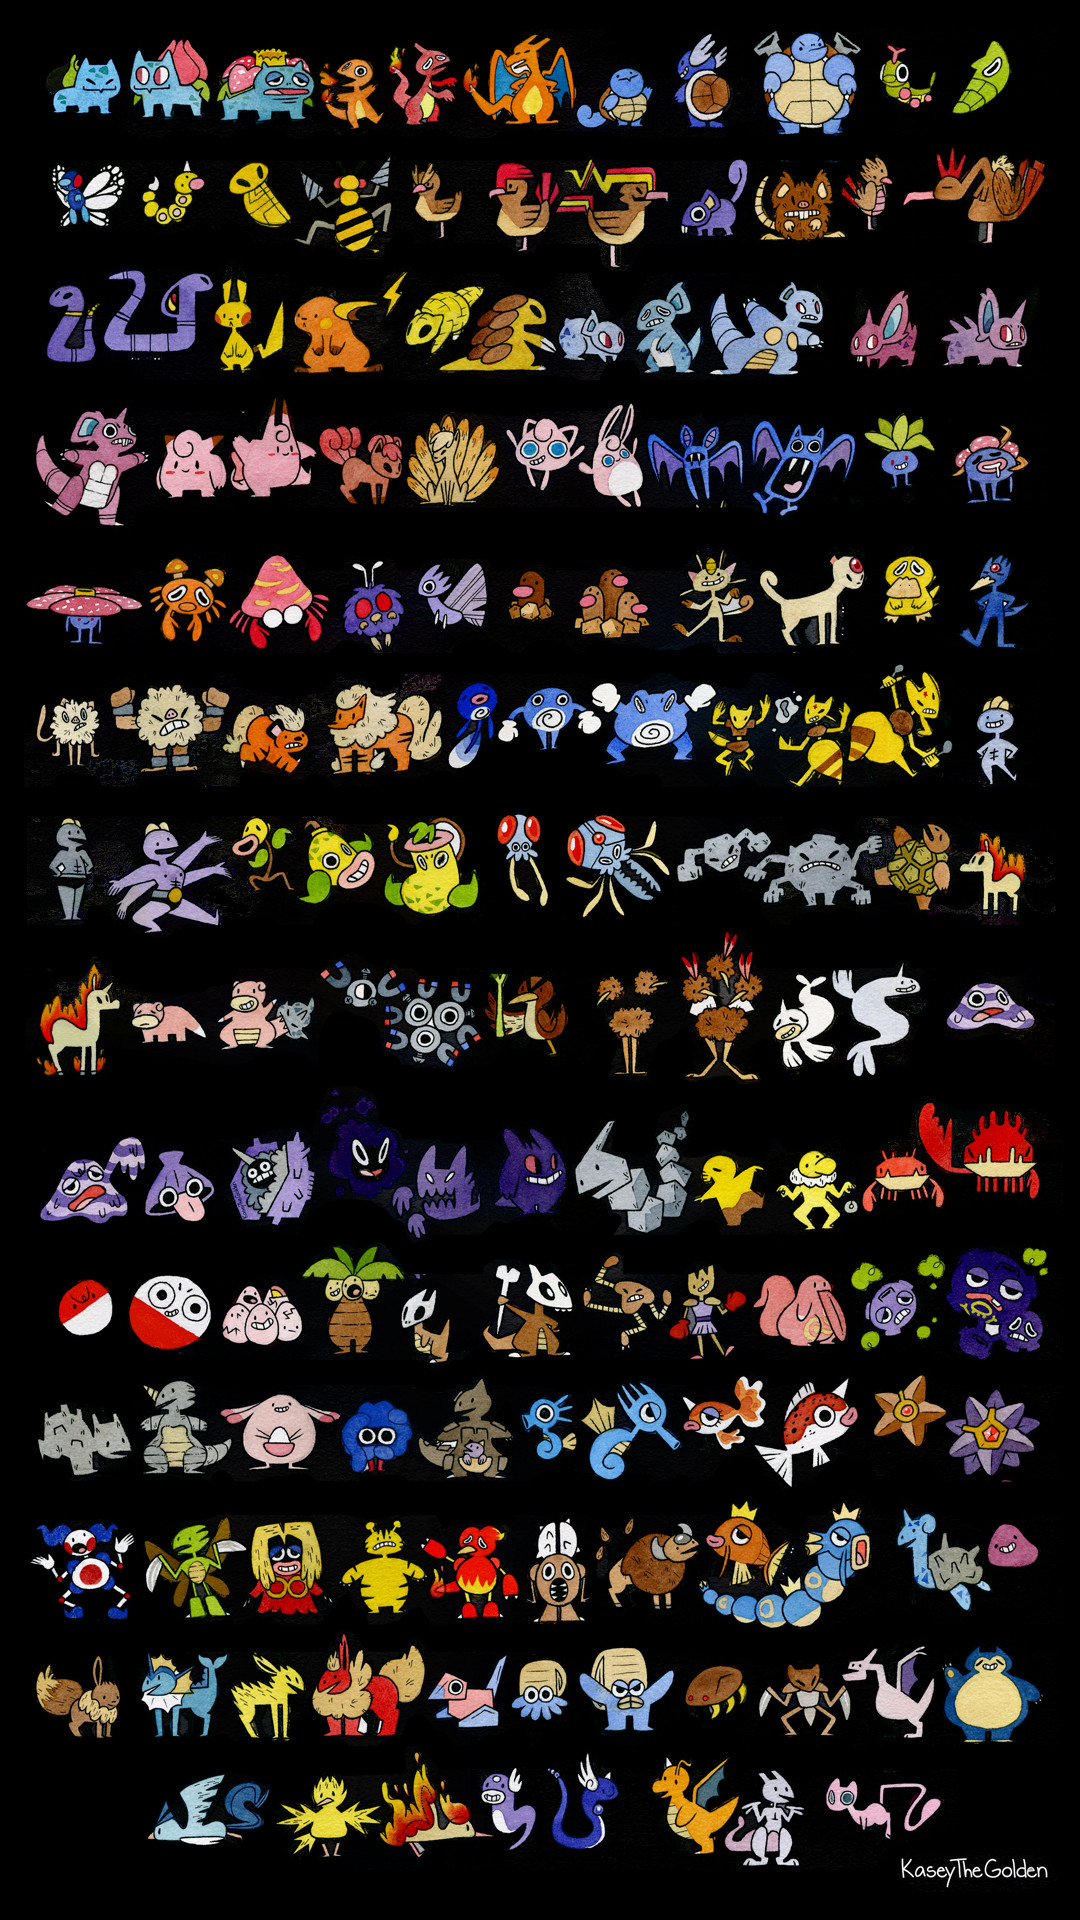 1080x1920 images] Multi Resolution of Pokemon Drawn from Memory Amoled Black: Mobile  /r/wallpapers